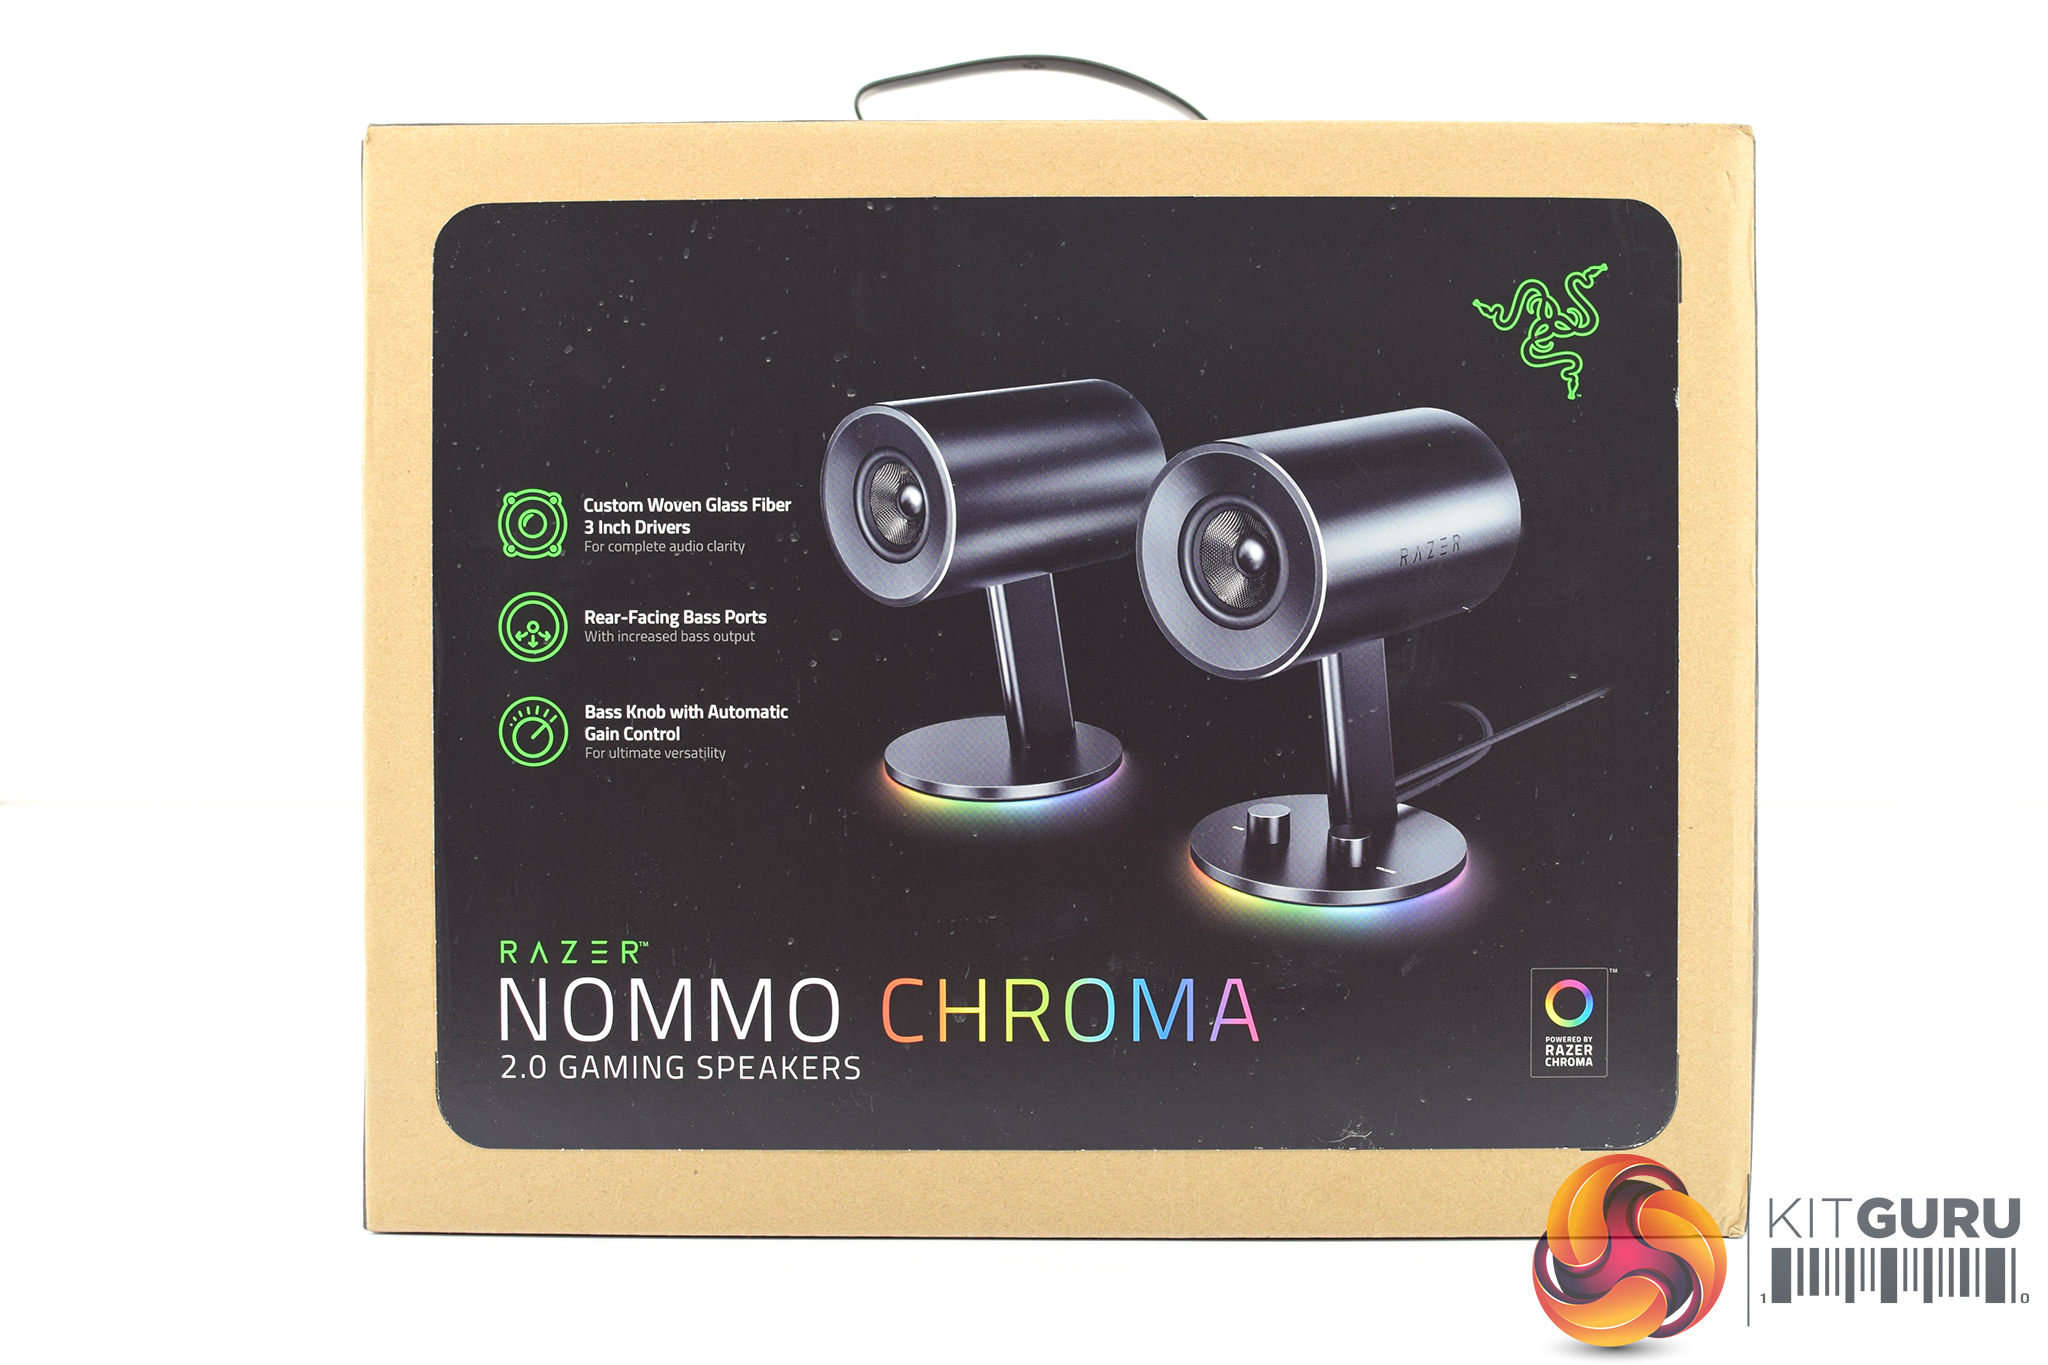 difference between razer nommo and nommo chroma